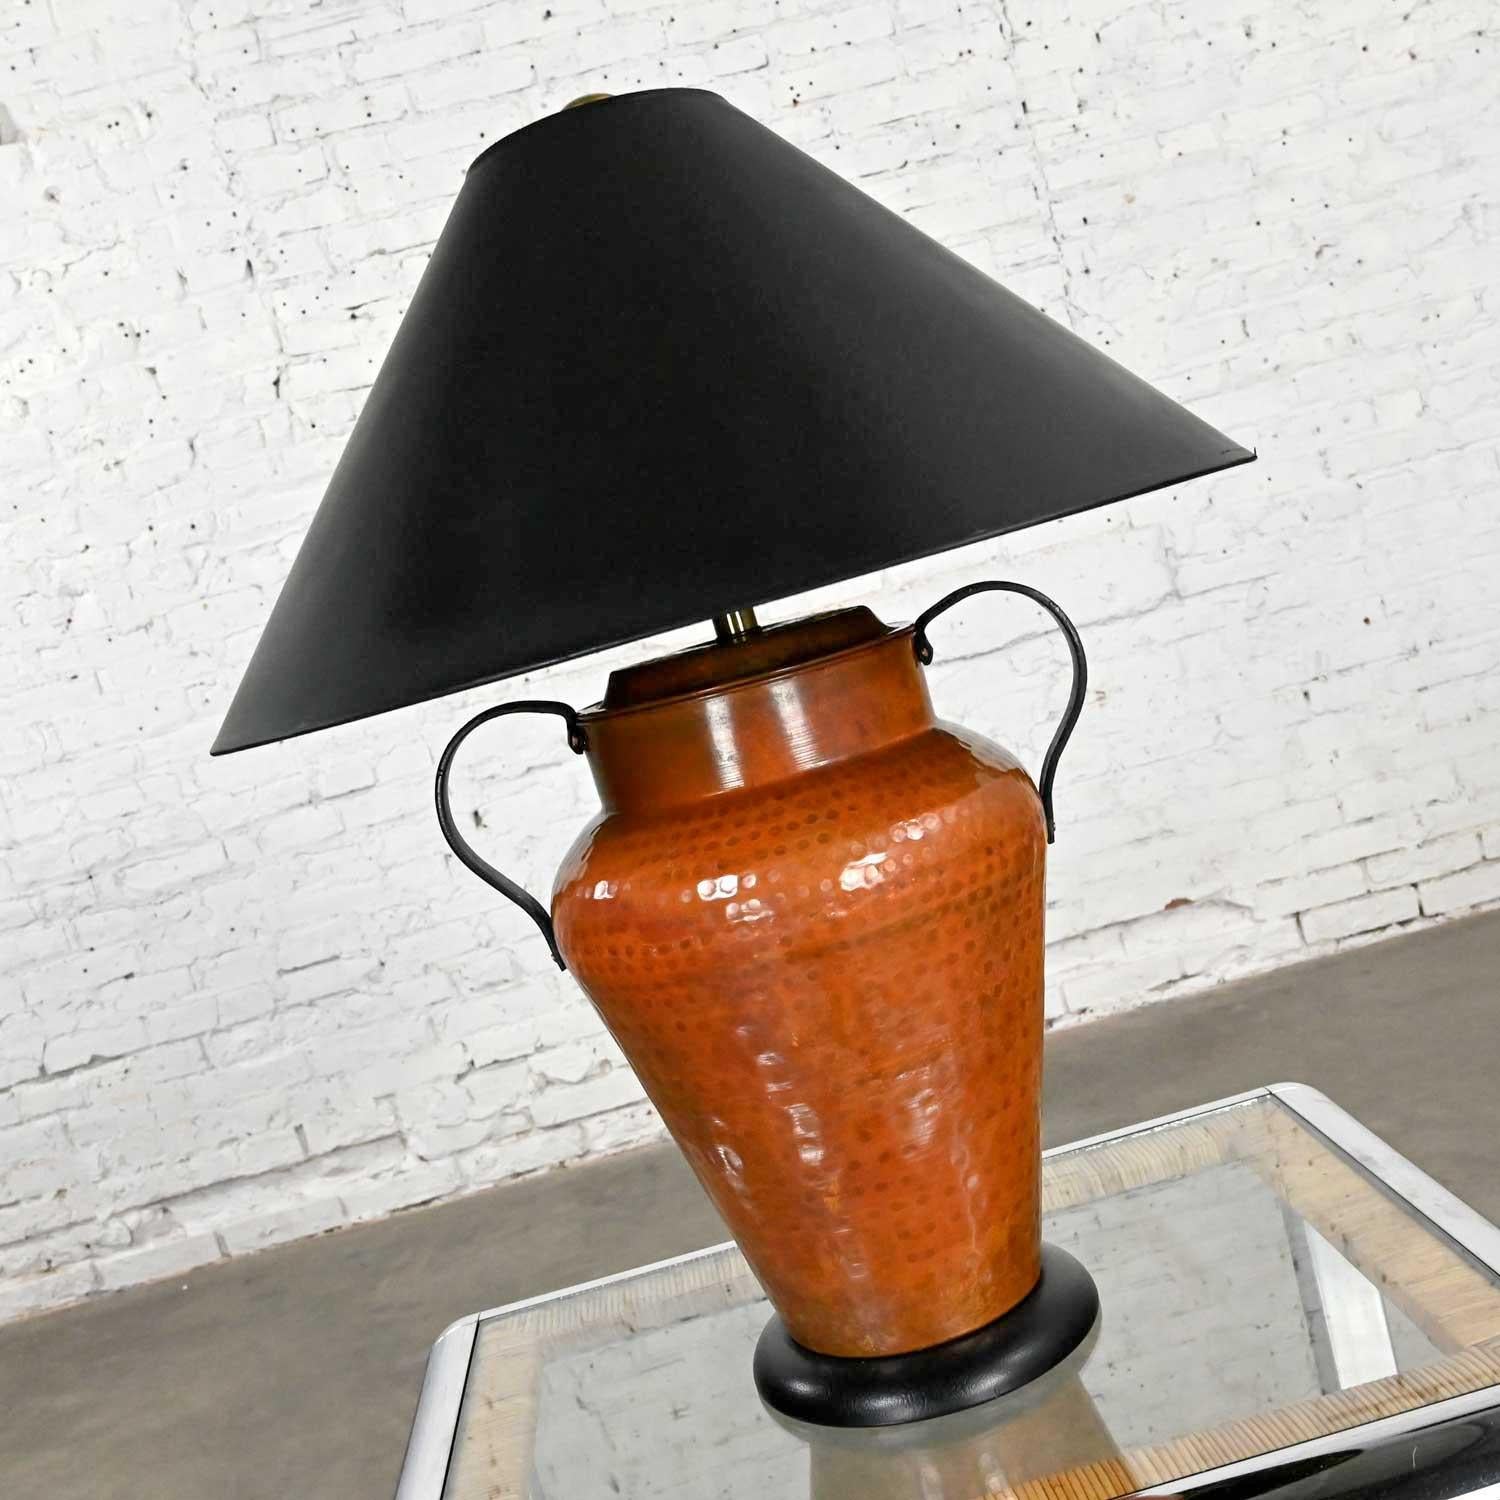 Wonderful Moorish style Frederick Cooper hammered copper urn or jug shaped double handled lamp with a black coolie shade. Beautiful condition, keeping in mind that this is vintage and not new so will have signs of use and wear. The exterior of the